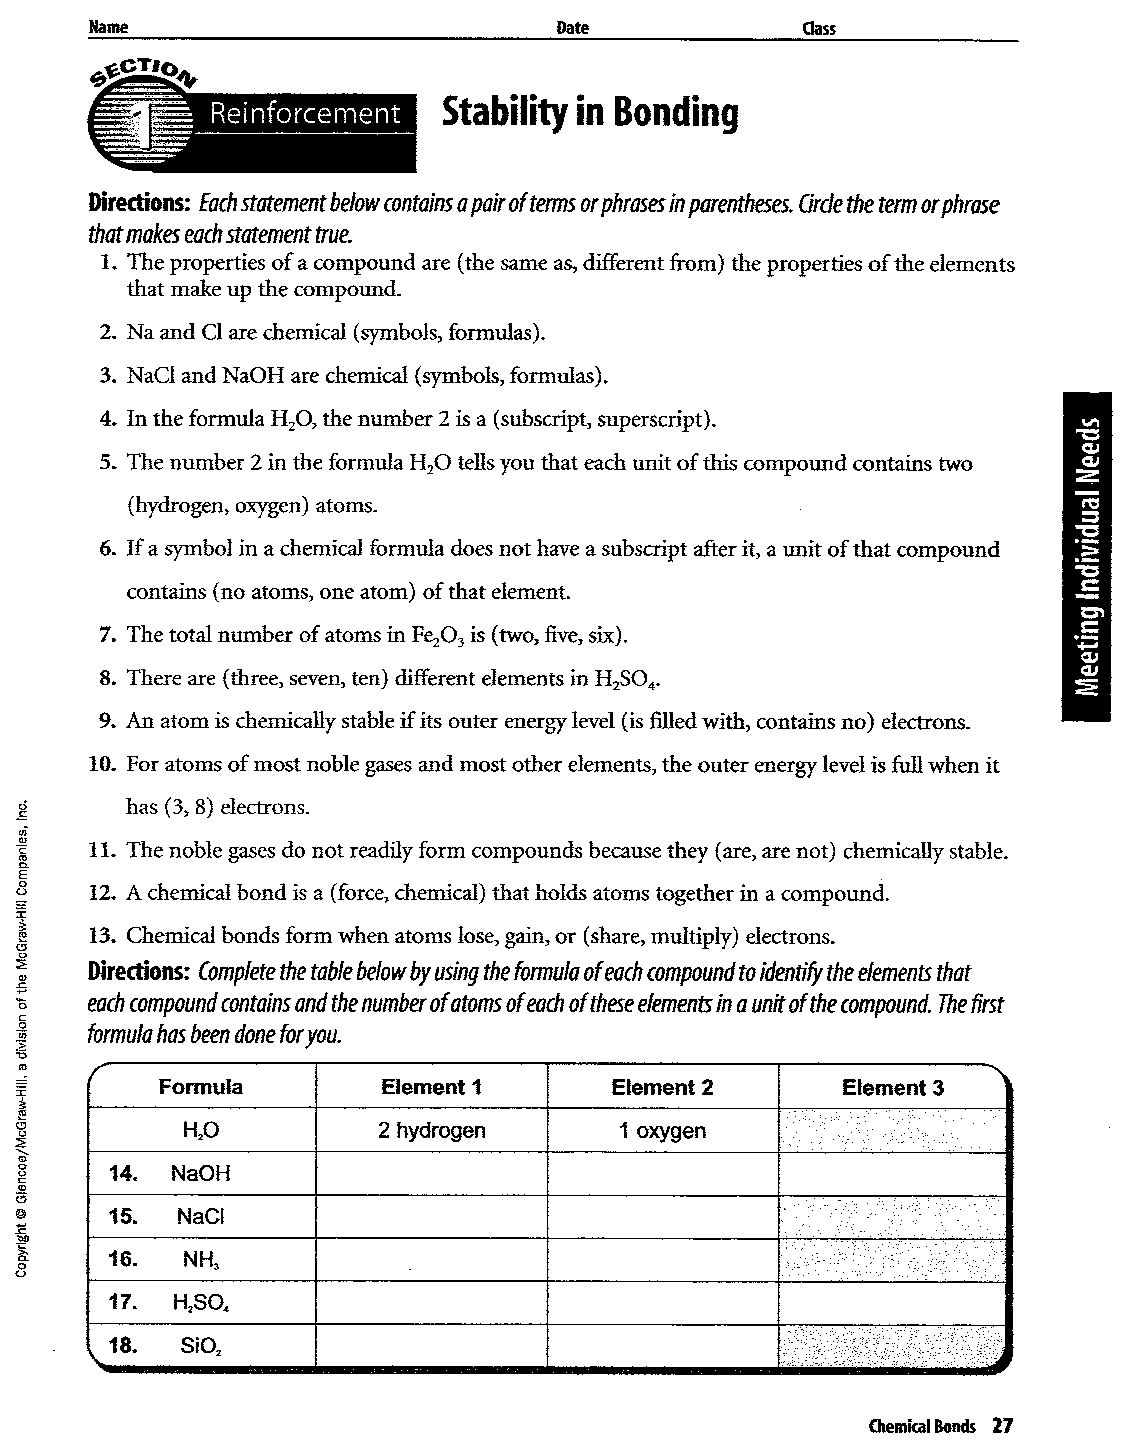 section-1-stability-in-bonding-worksheet-answers-top